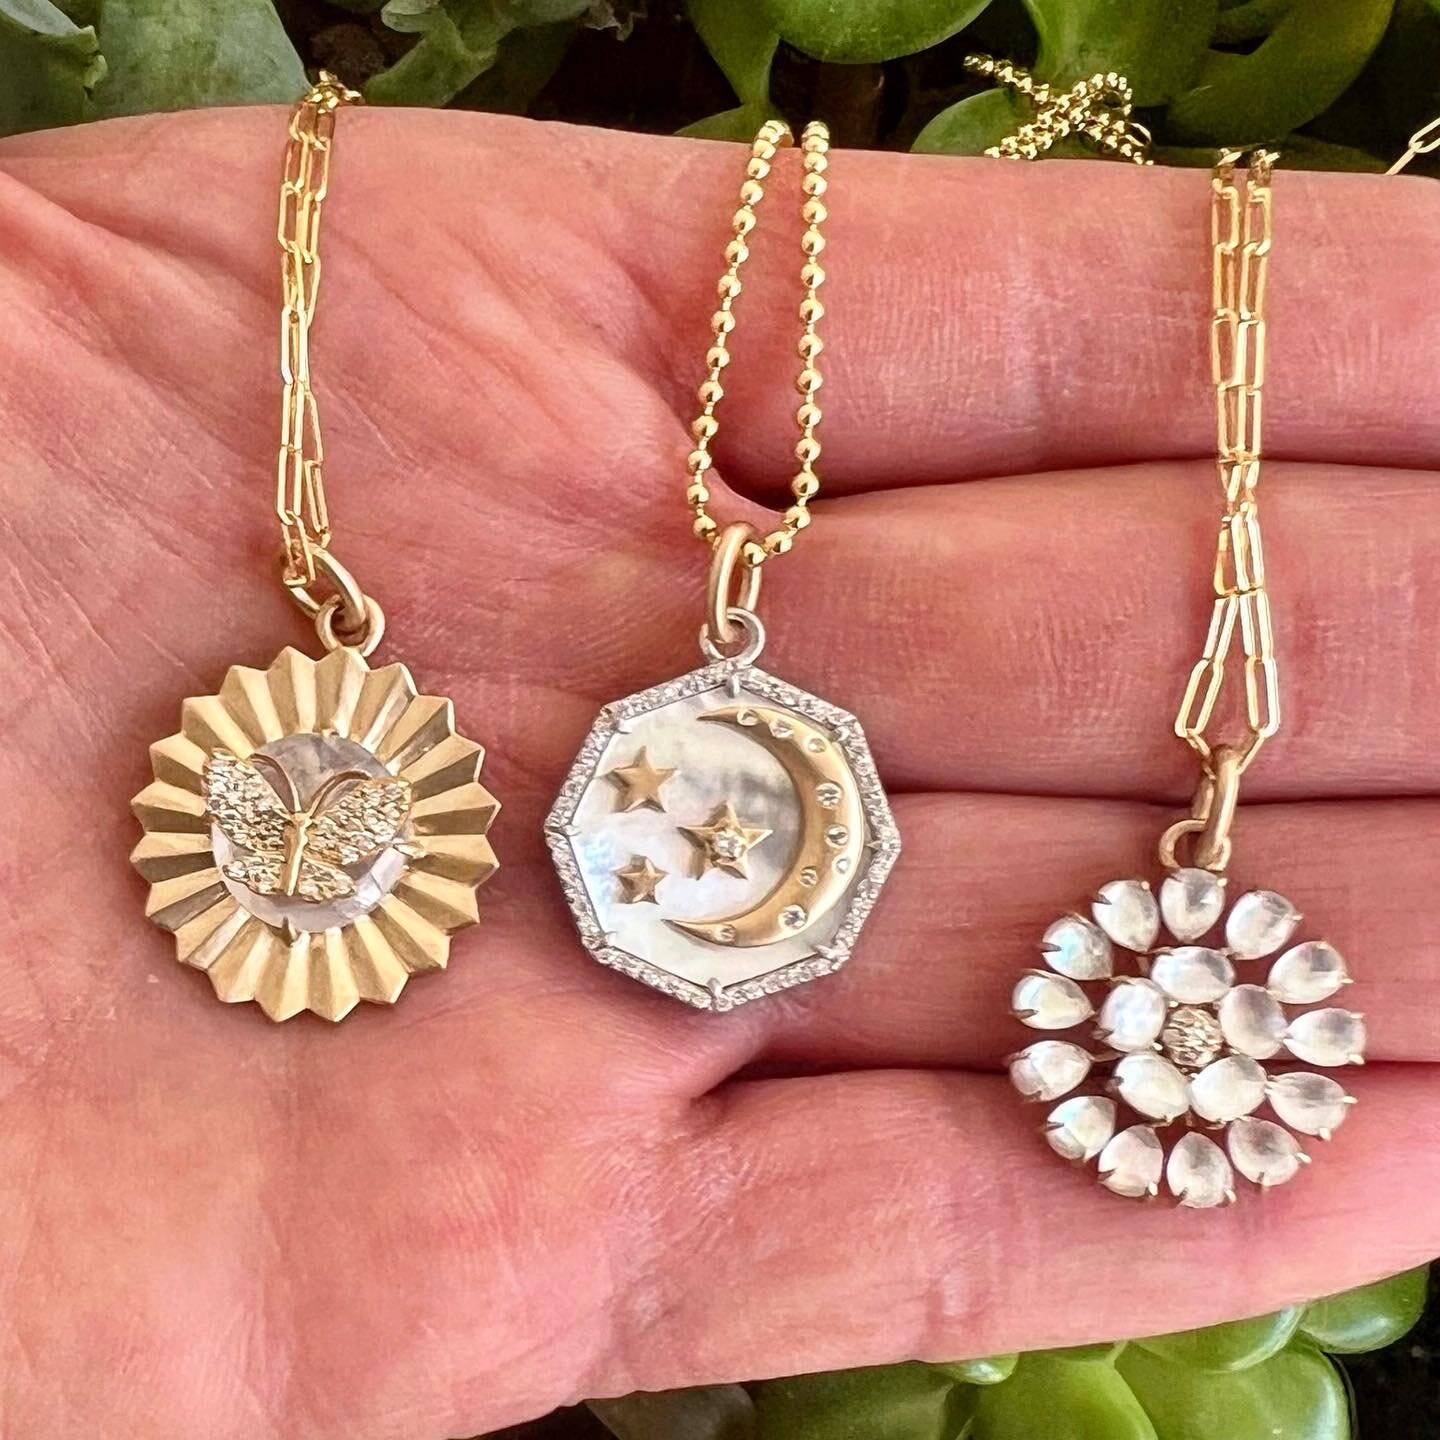 Newness alert!!!
I'm in ❤️ with my newest designs!!
.
.
.
.
#charms #pendants #mixed metals #gold #14k #newdesign #celestial #celestialjewelry #finejewelry #designerjewelry